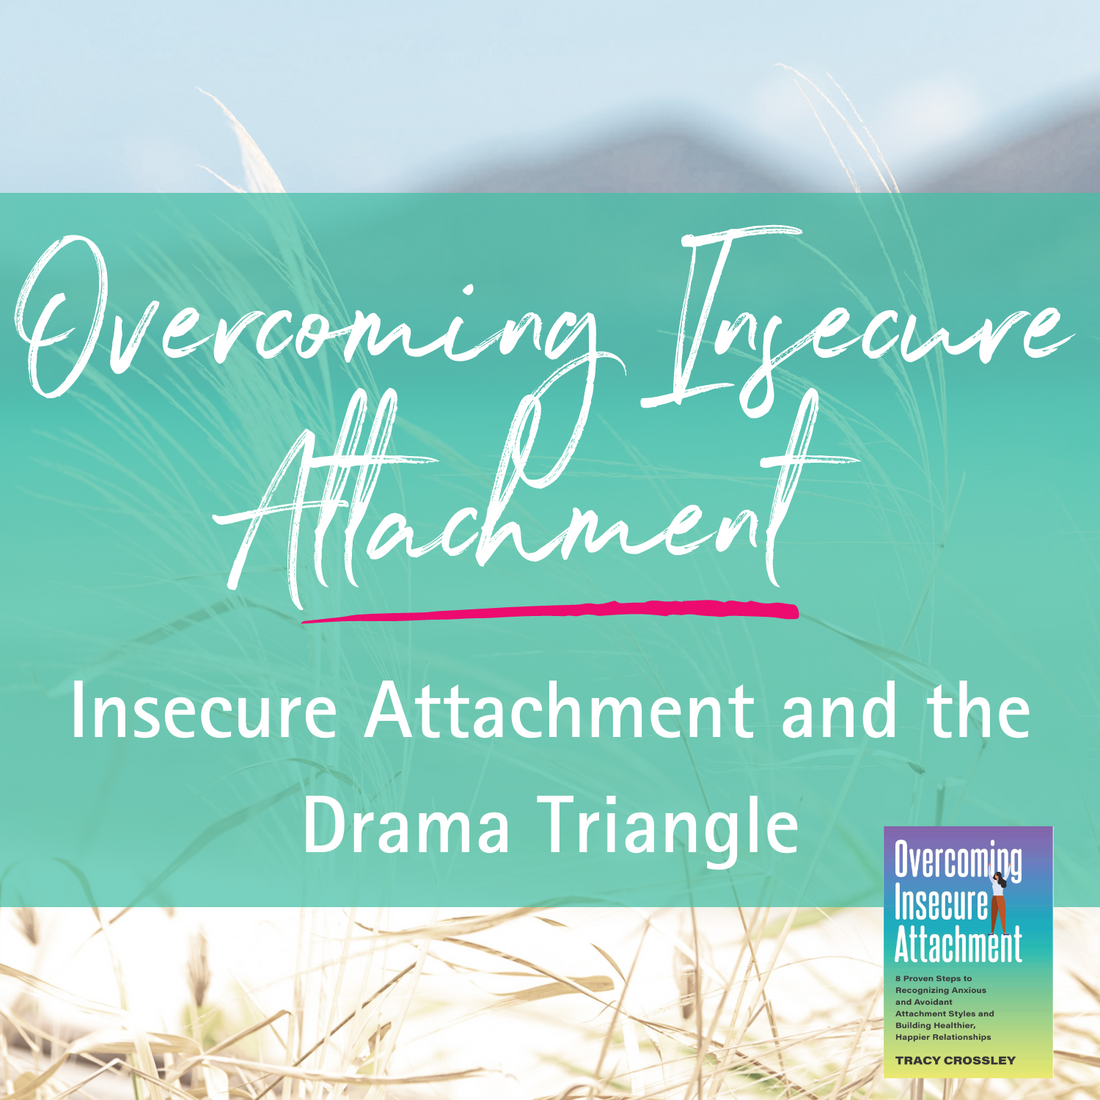 Overcoming Insecure Attachment | Insecure Attachment and Drama Triangle